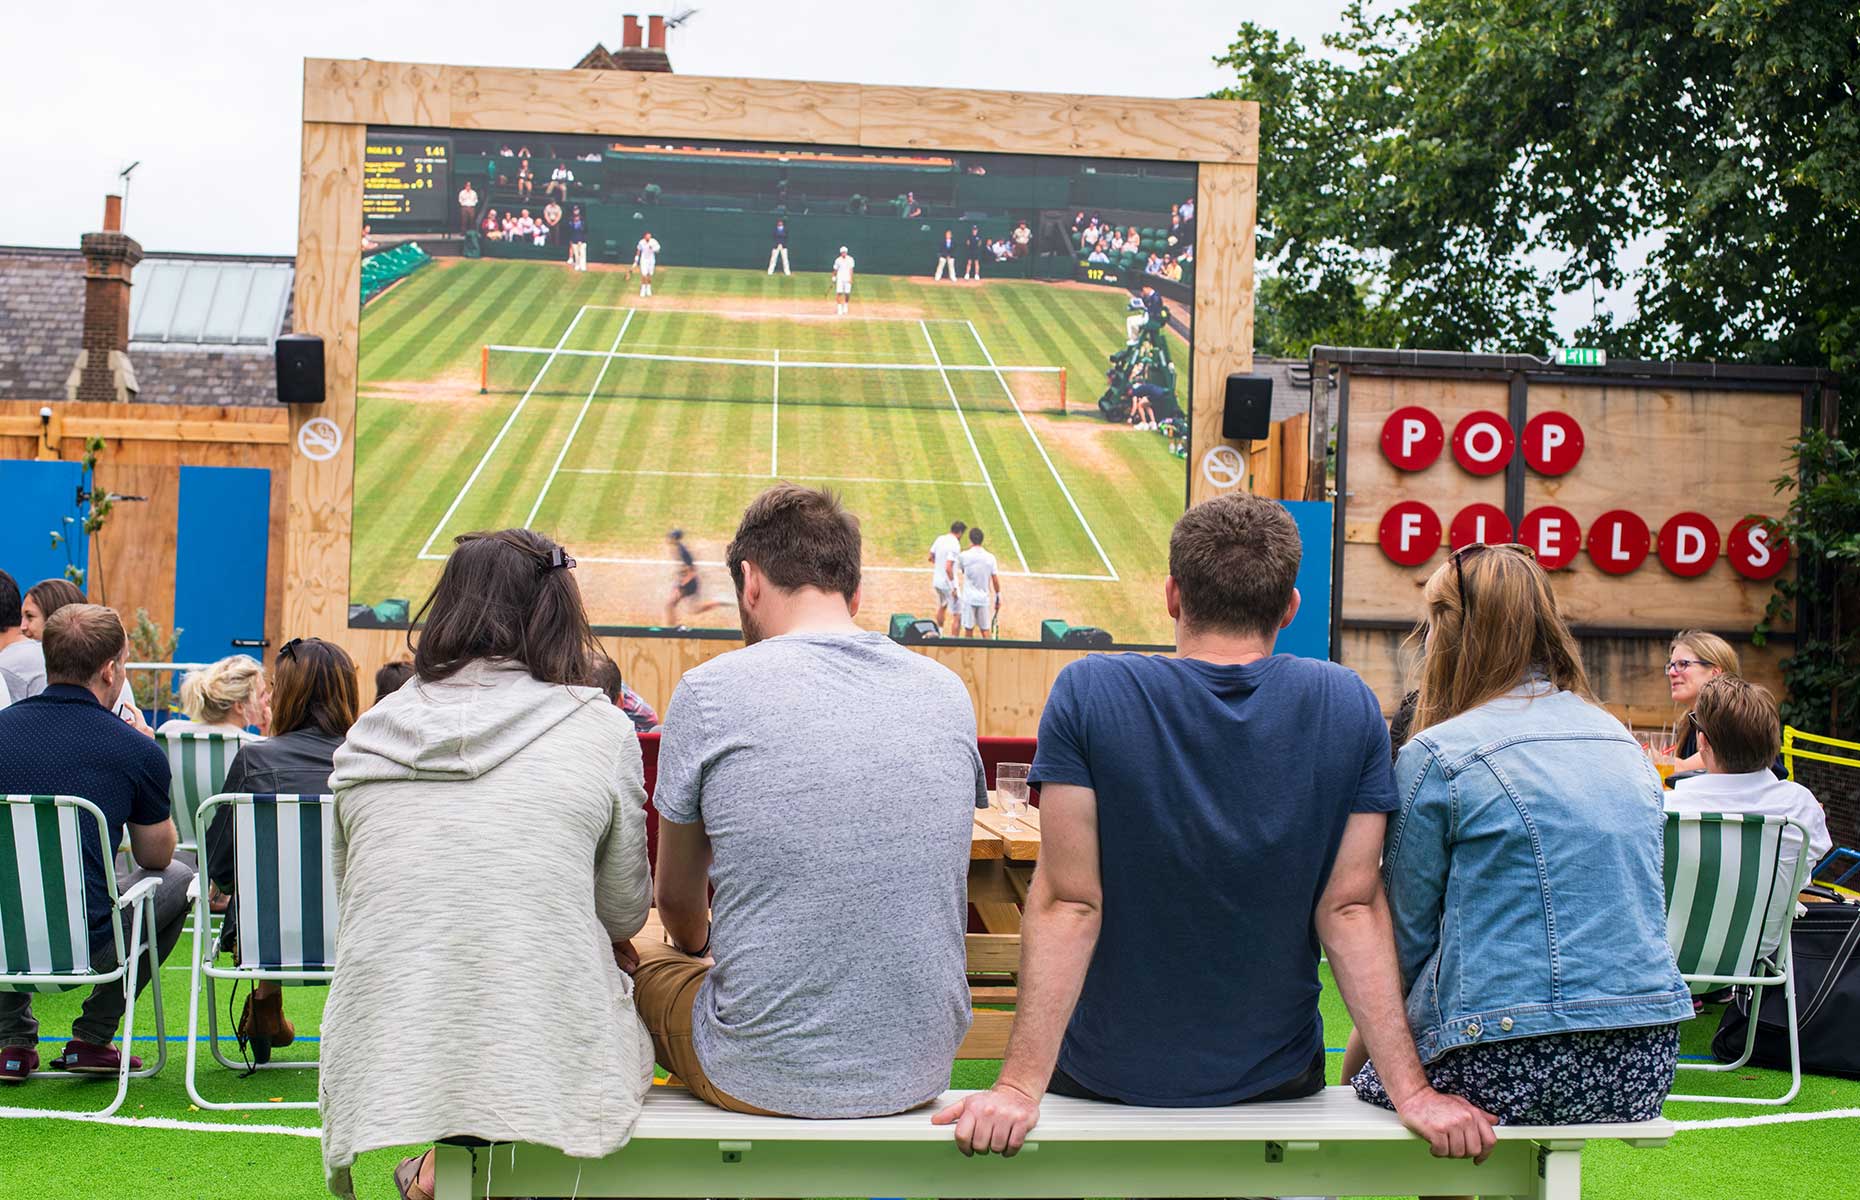 You can watch Wimbledon on big screens around London if you don't get tickets